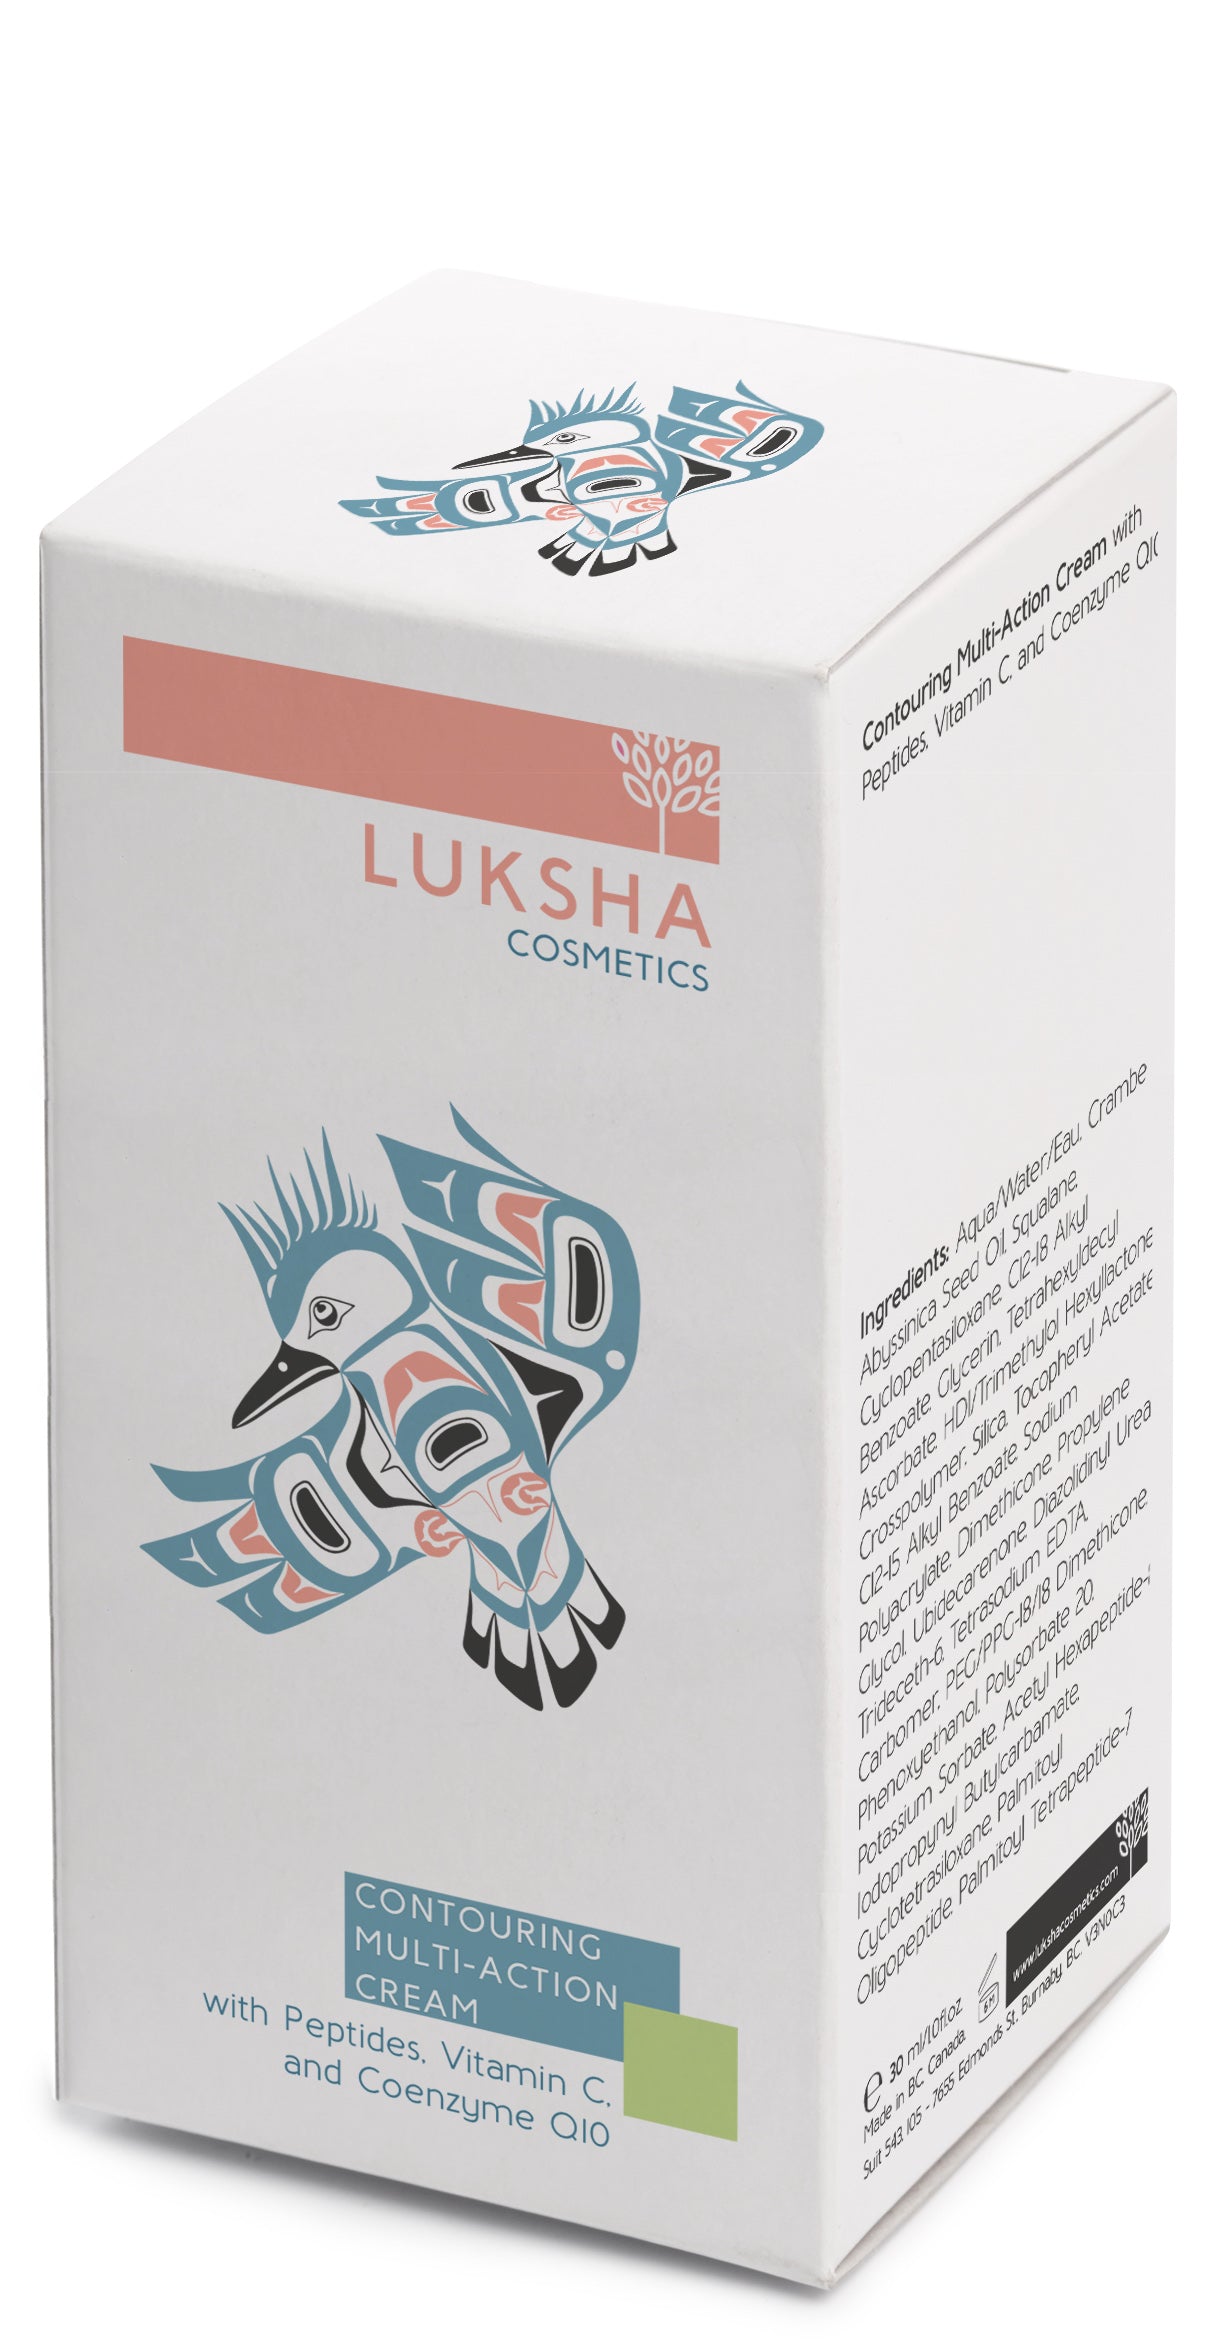 Contouring Multi-Action Cream with Peptides, Vitamin C, and Coenzyme Q10.